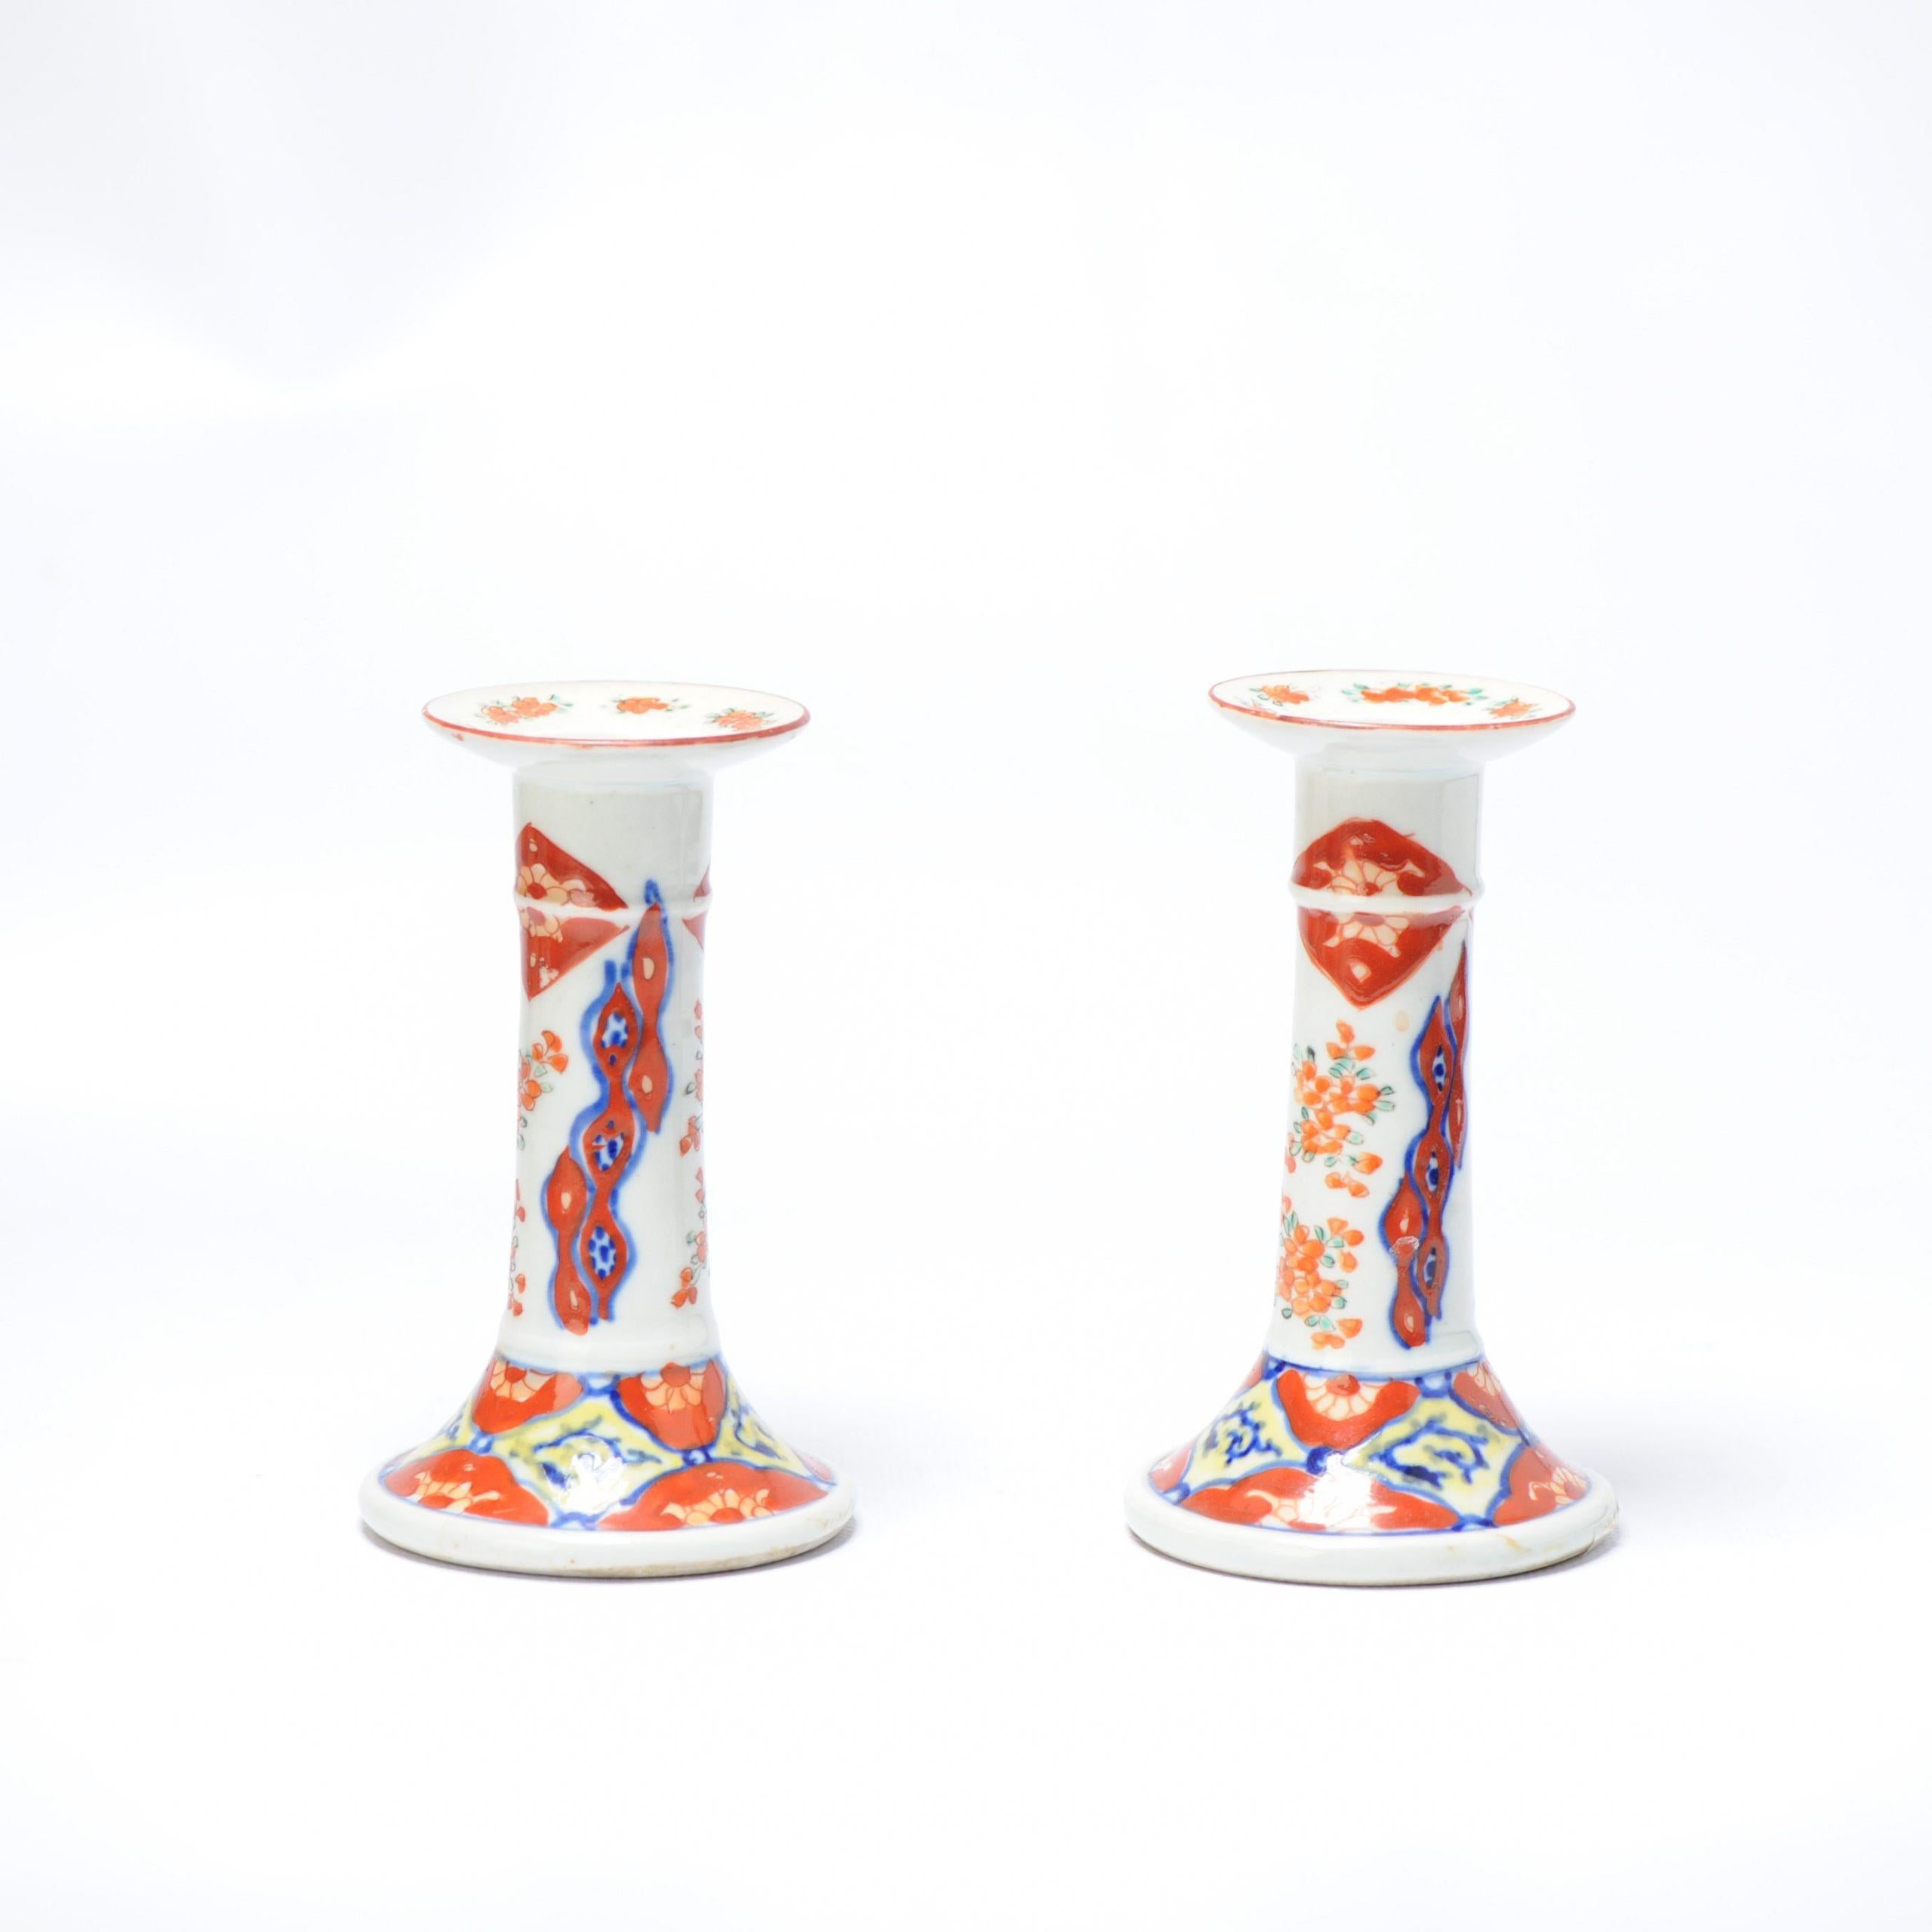 Antique Japanese Porcelain Candle Sticks Edo or Meiji Period, 19th Century In Good Condition For Sale In Amsterdam, Noord Holland